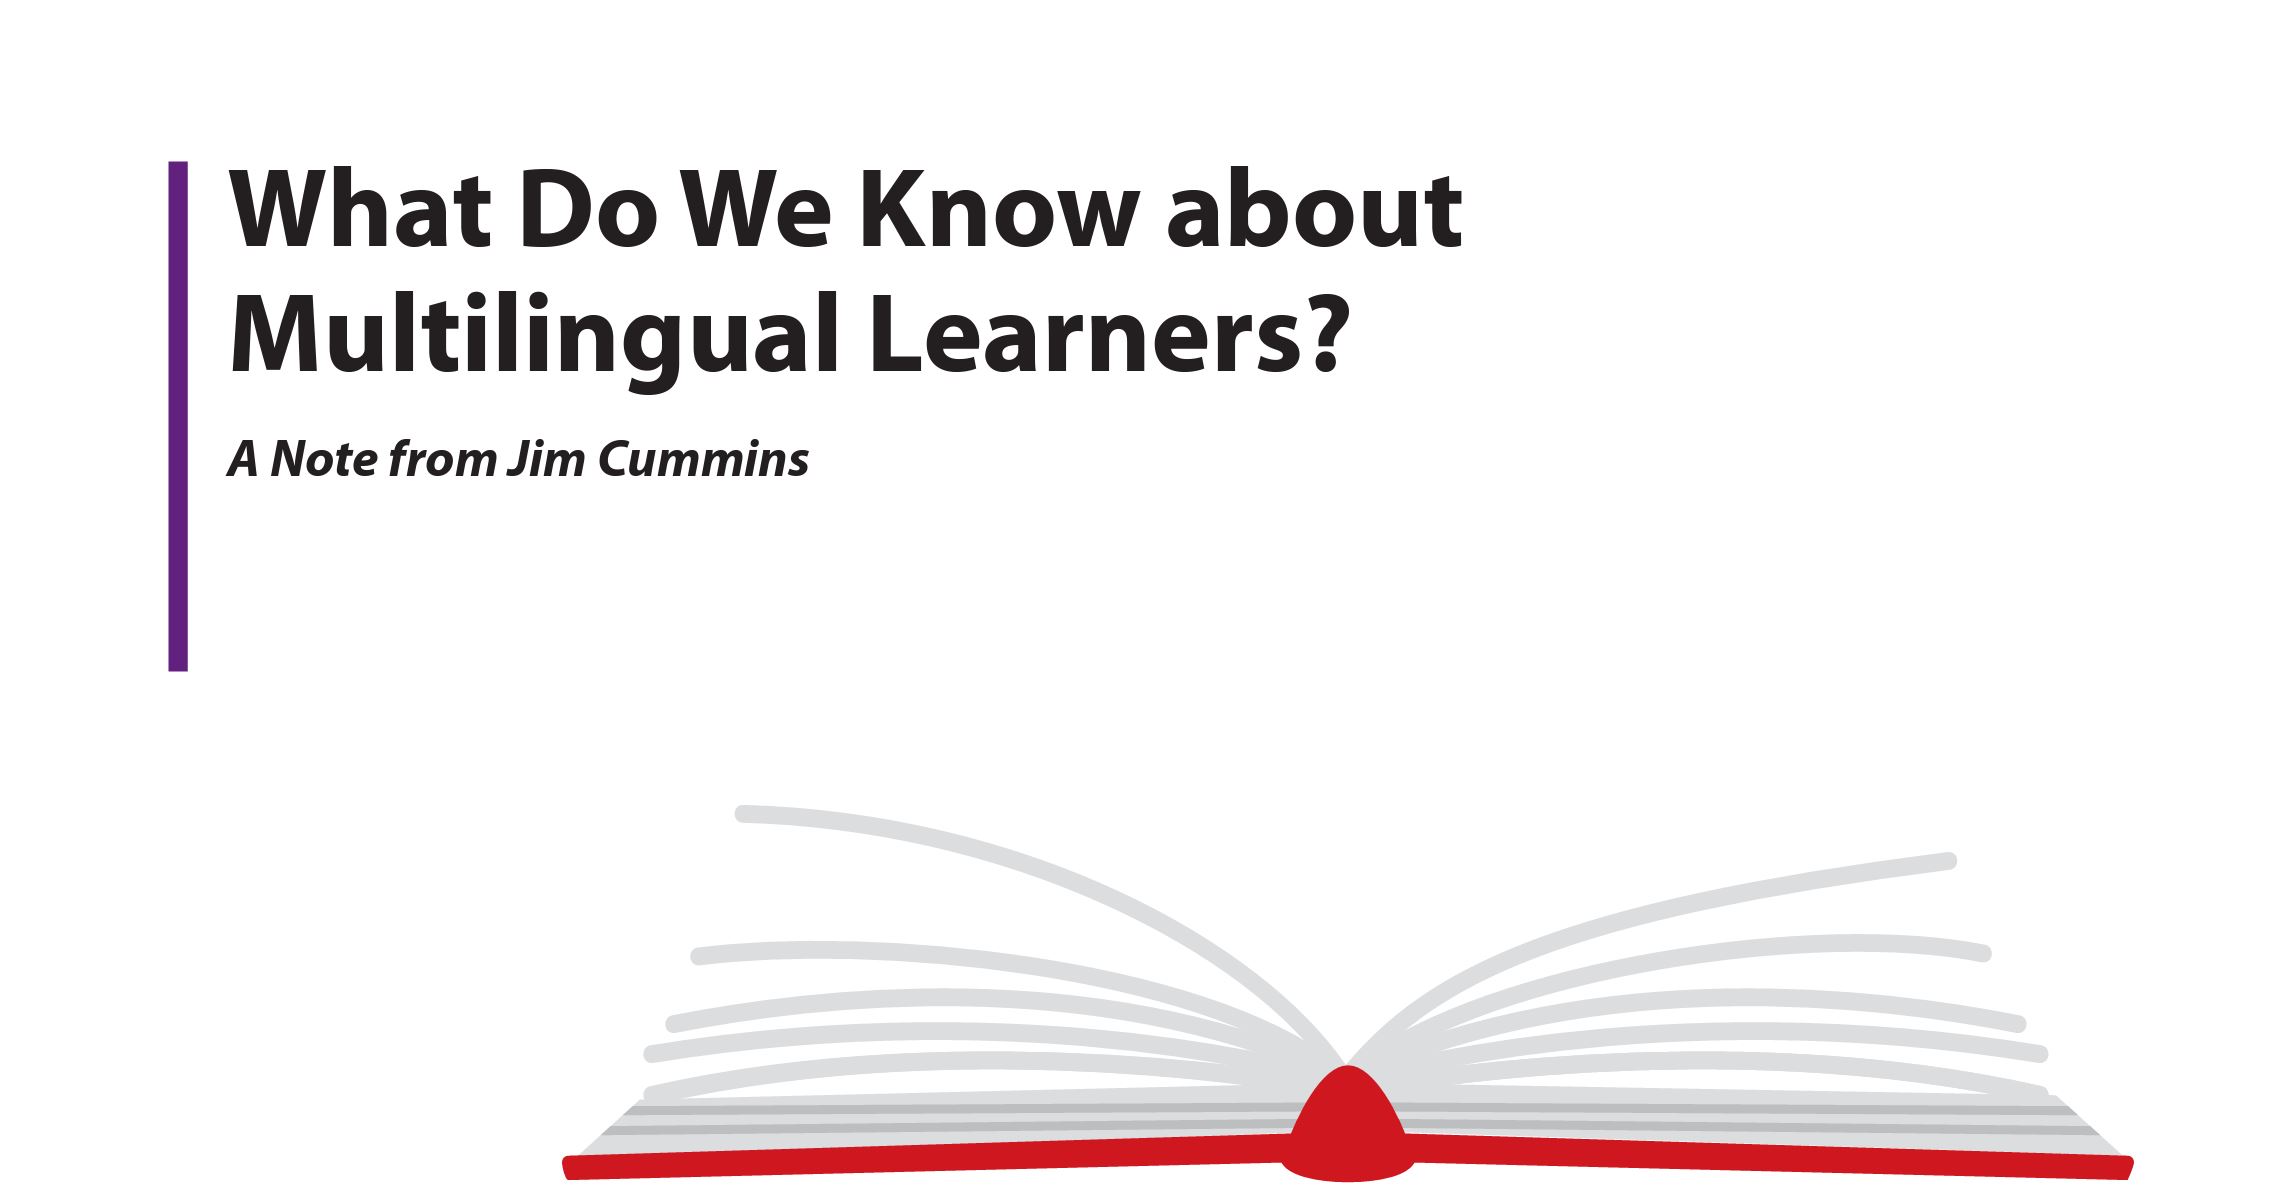 What Do We Know about Multilingual Learners?